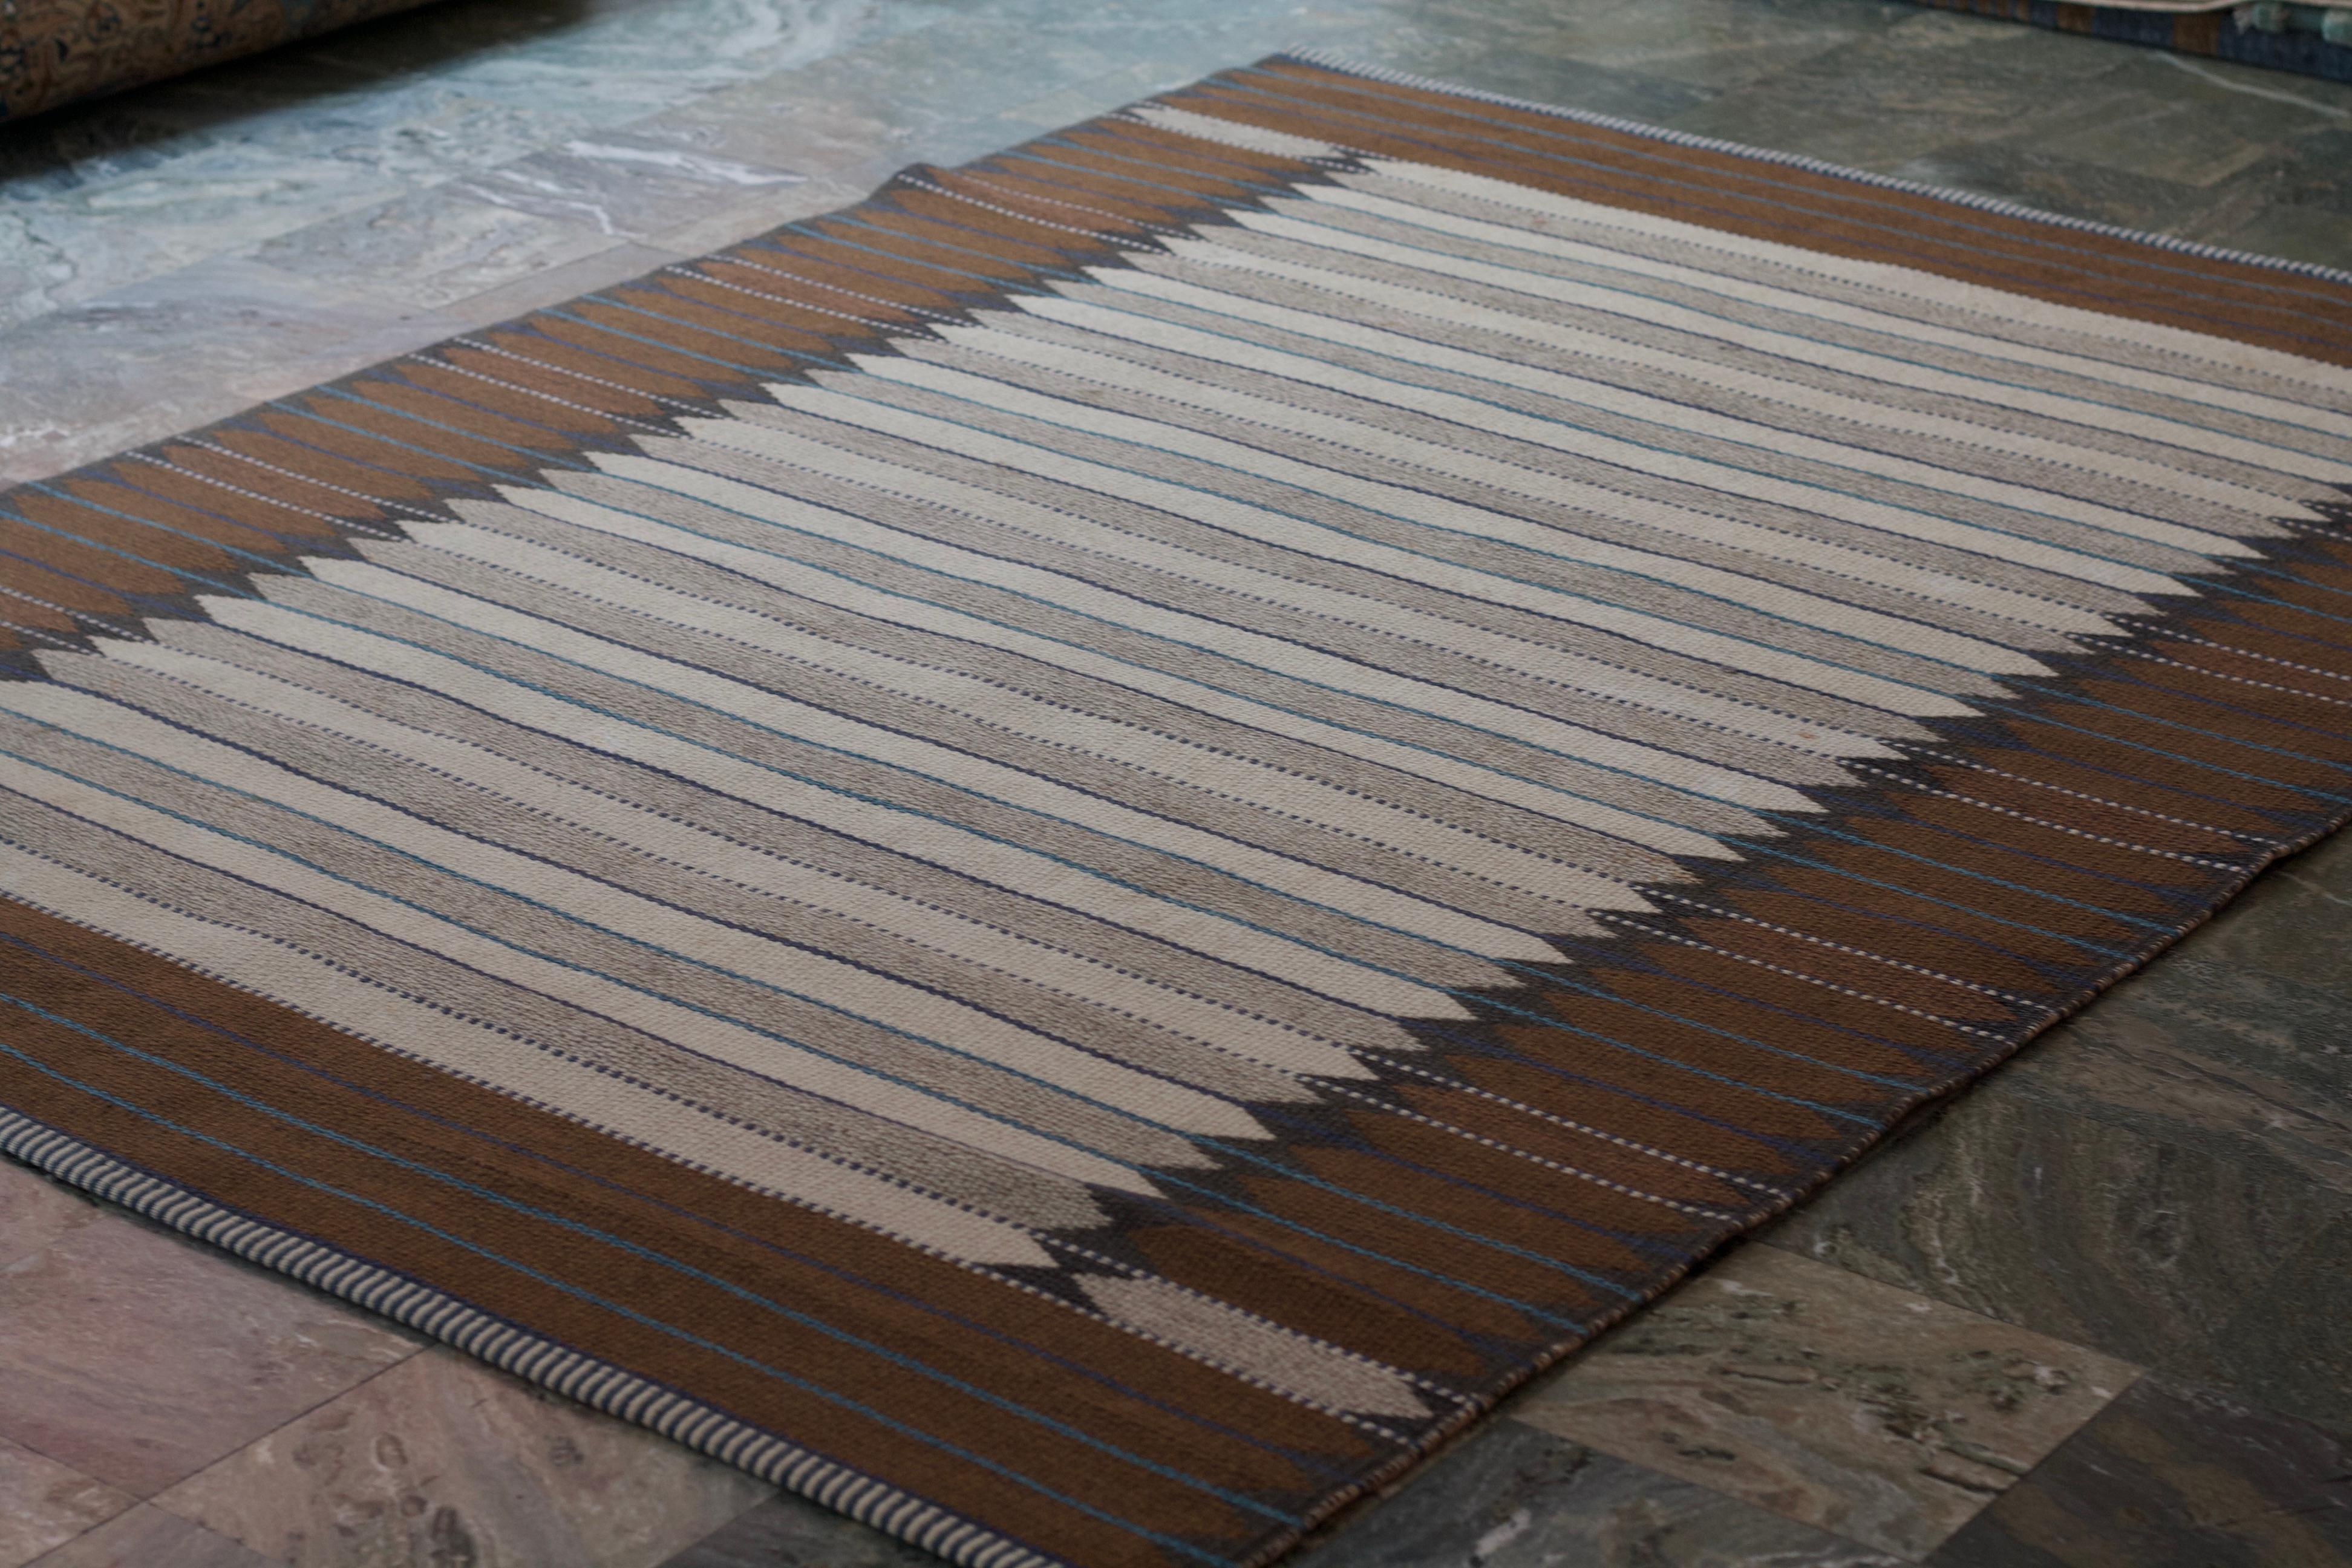 A beautiful flat weaved double sided rug created by textile designer Ingrid Dessau in Sweden ca 1950. Brown and white on one side and two shades of brown on the other side, both sides with details in blue. The rug is handwoven in wool. Sold in